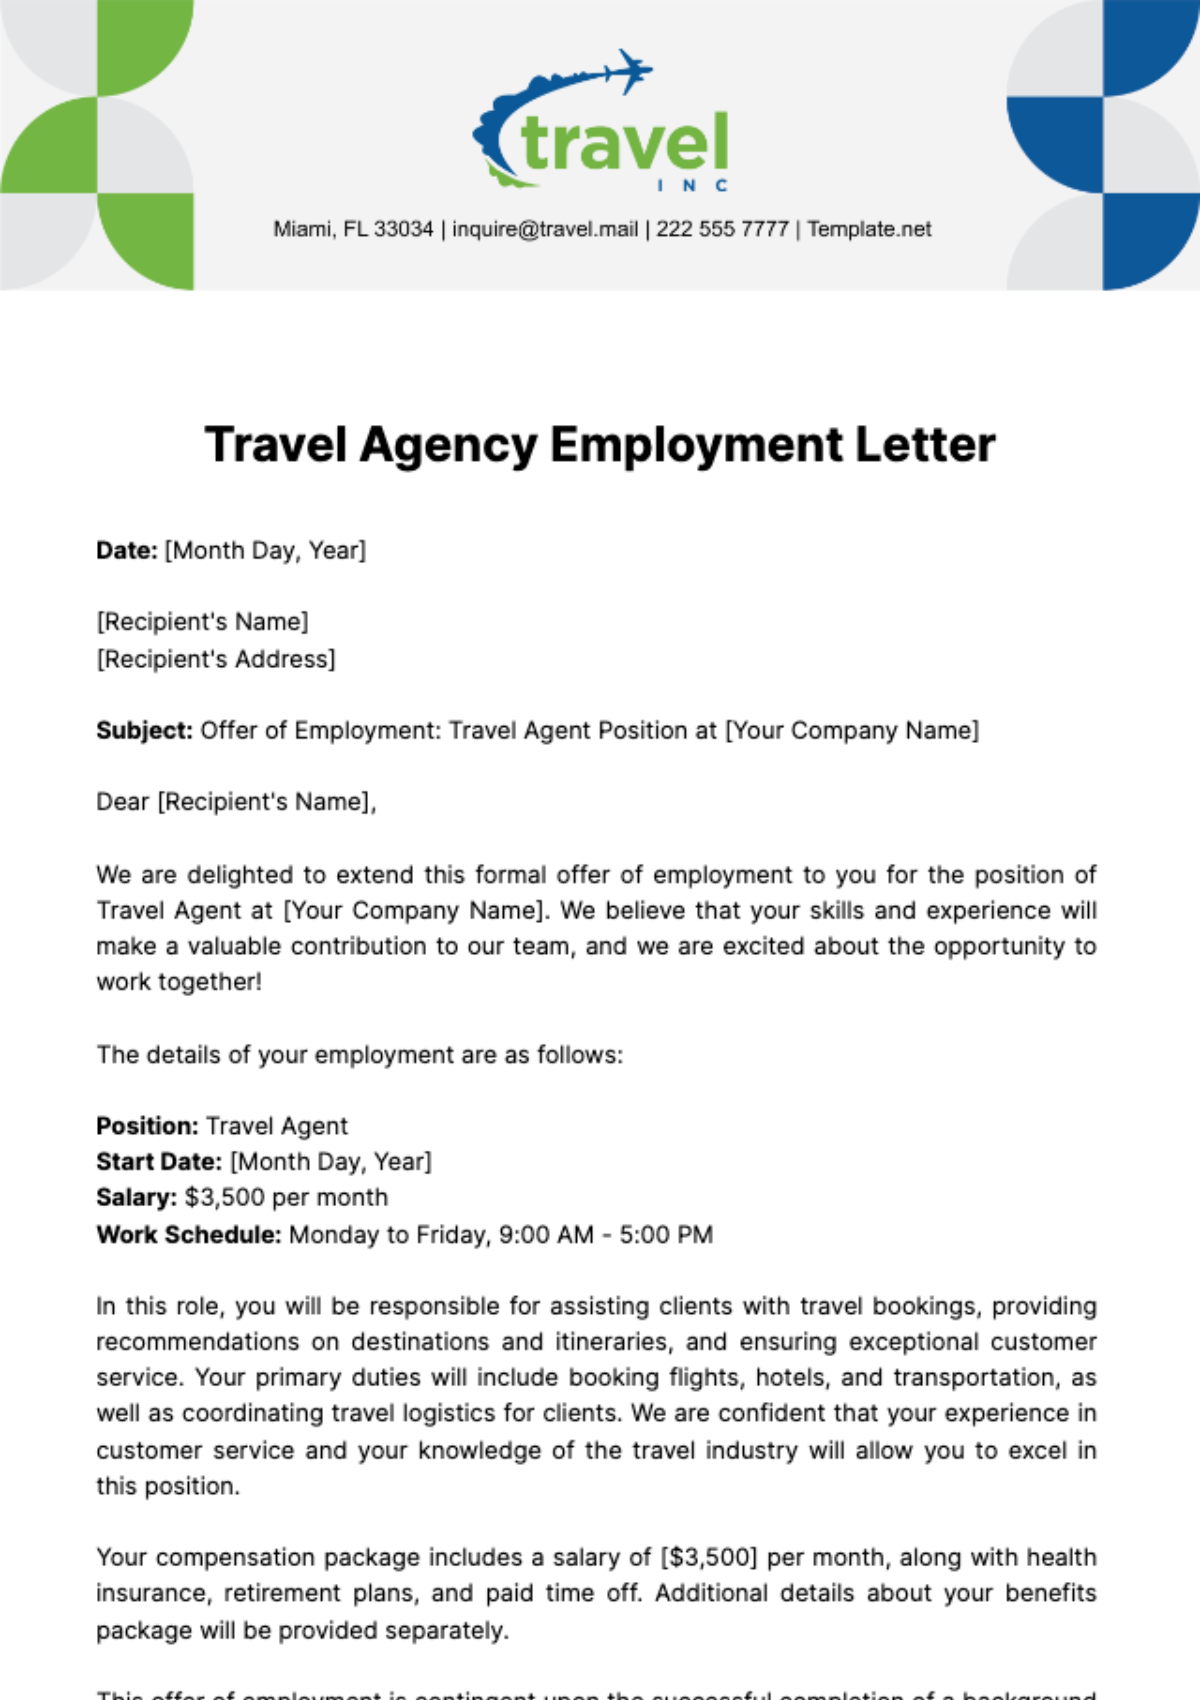 Travel Agency Employment Letter Template